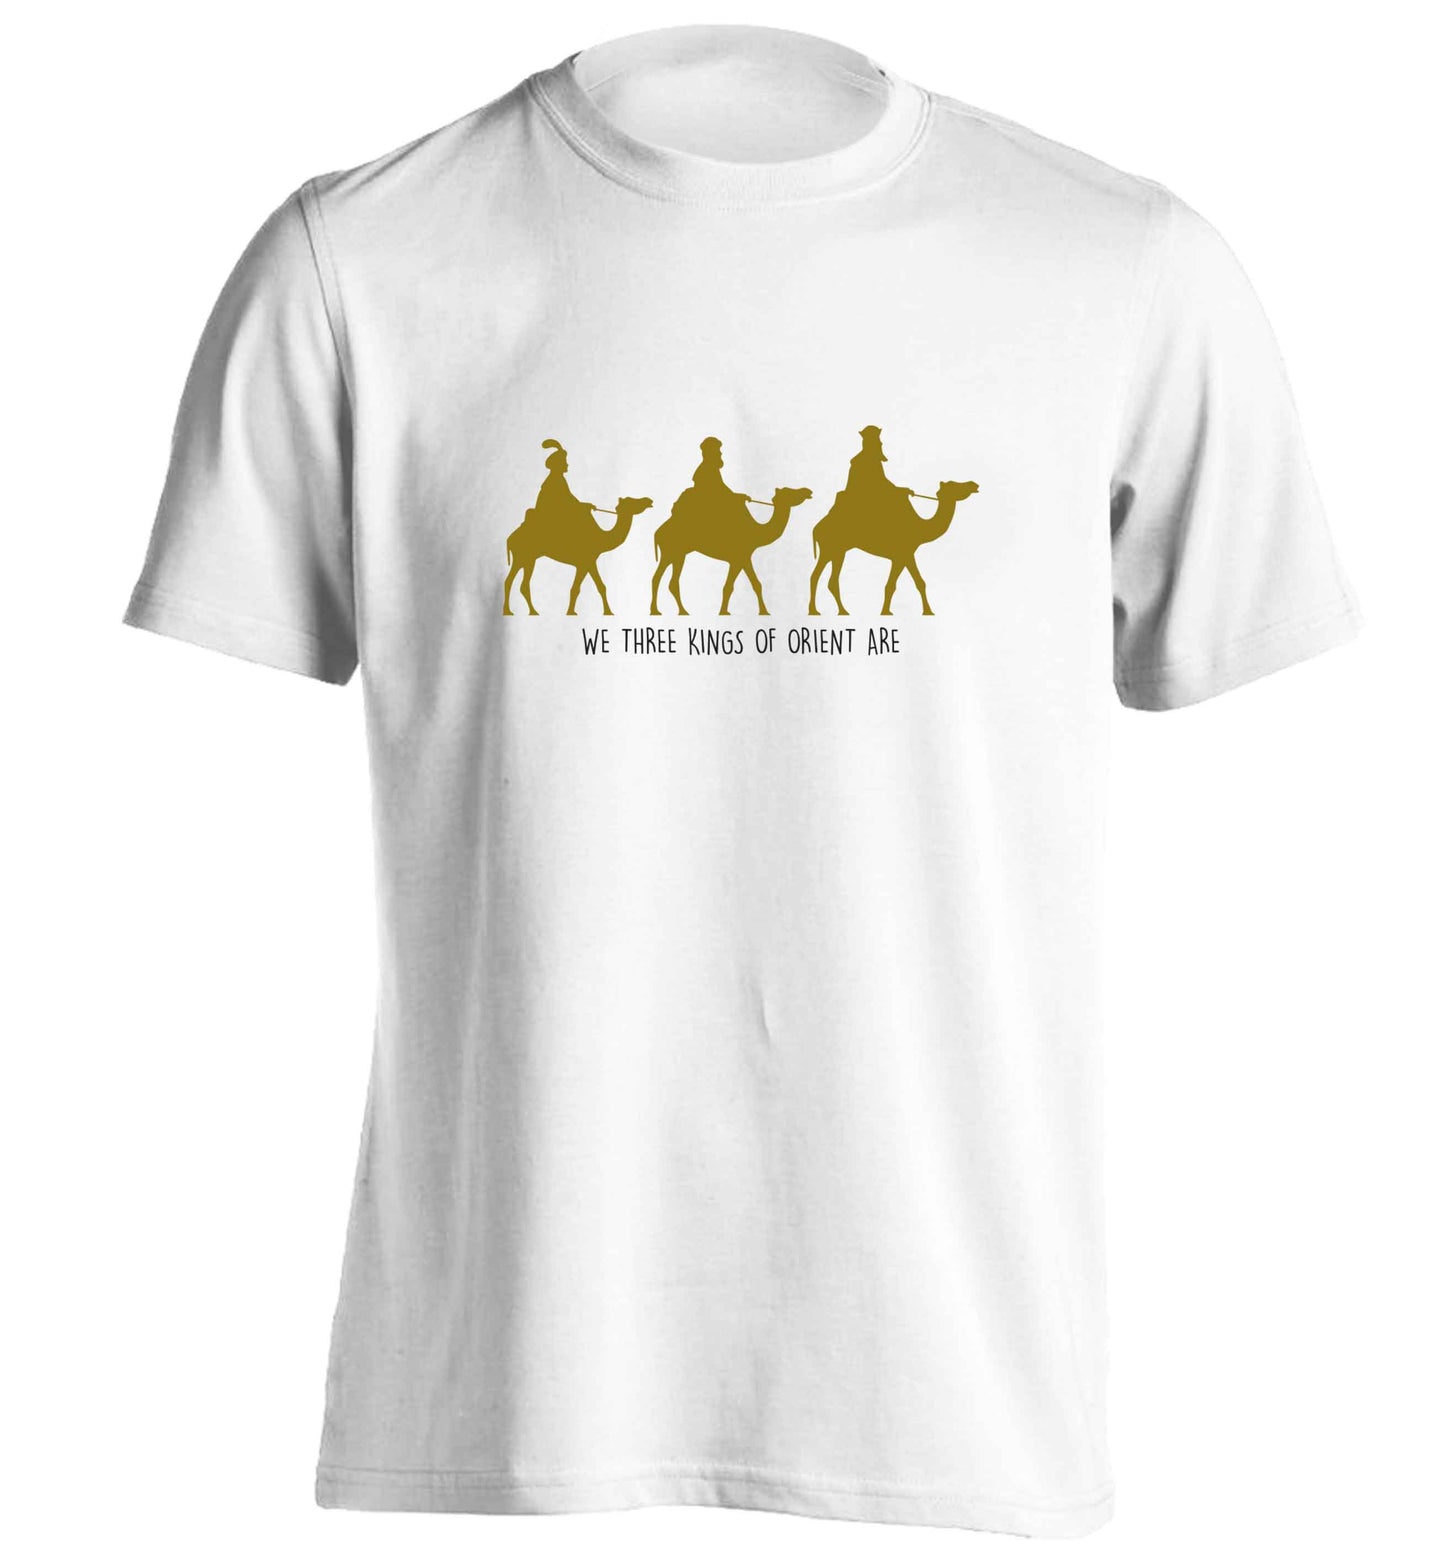 We three kings of orient are adults unisex white Tshirt 2XL